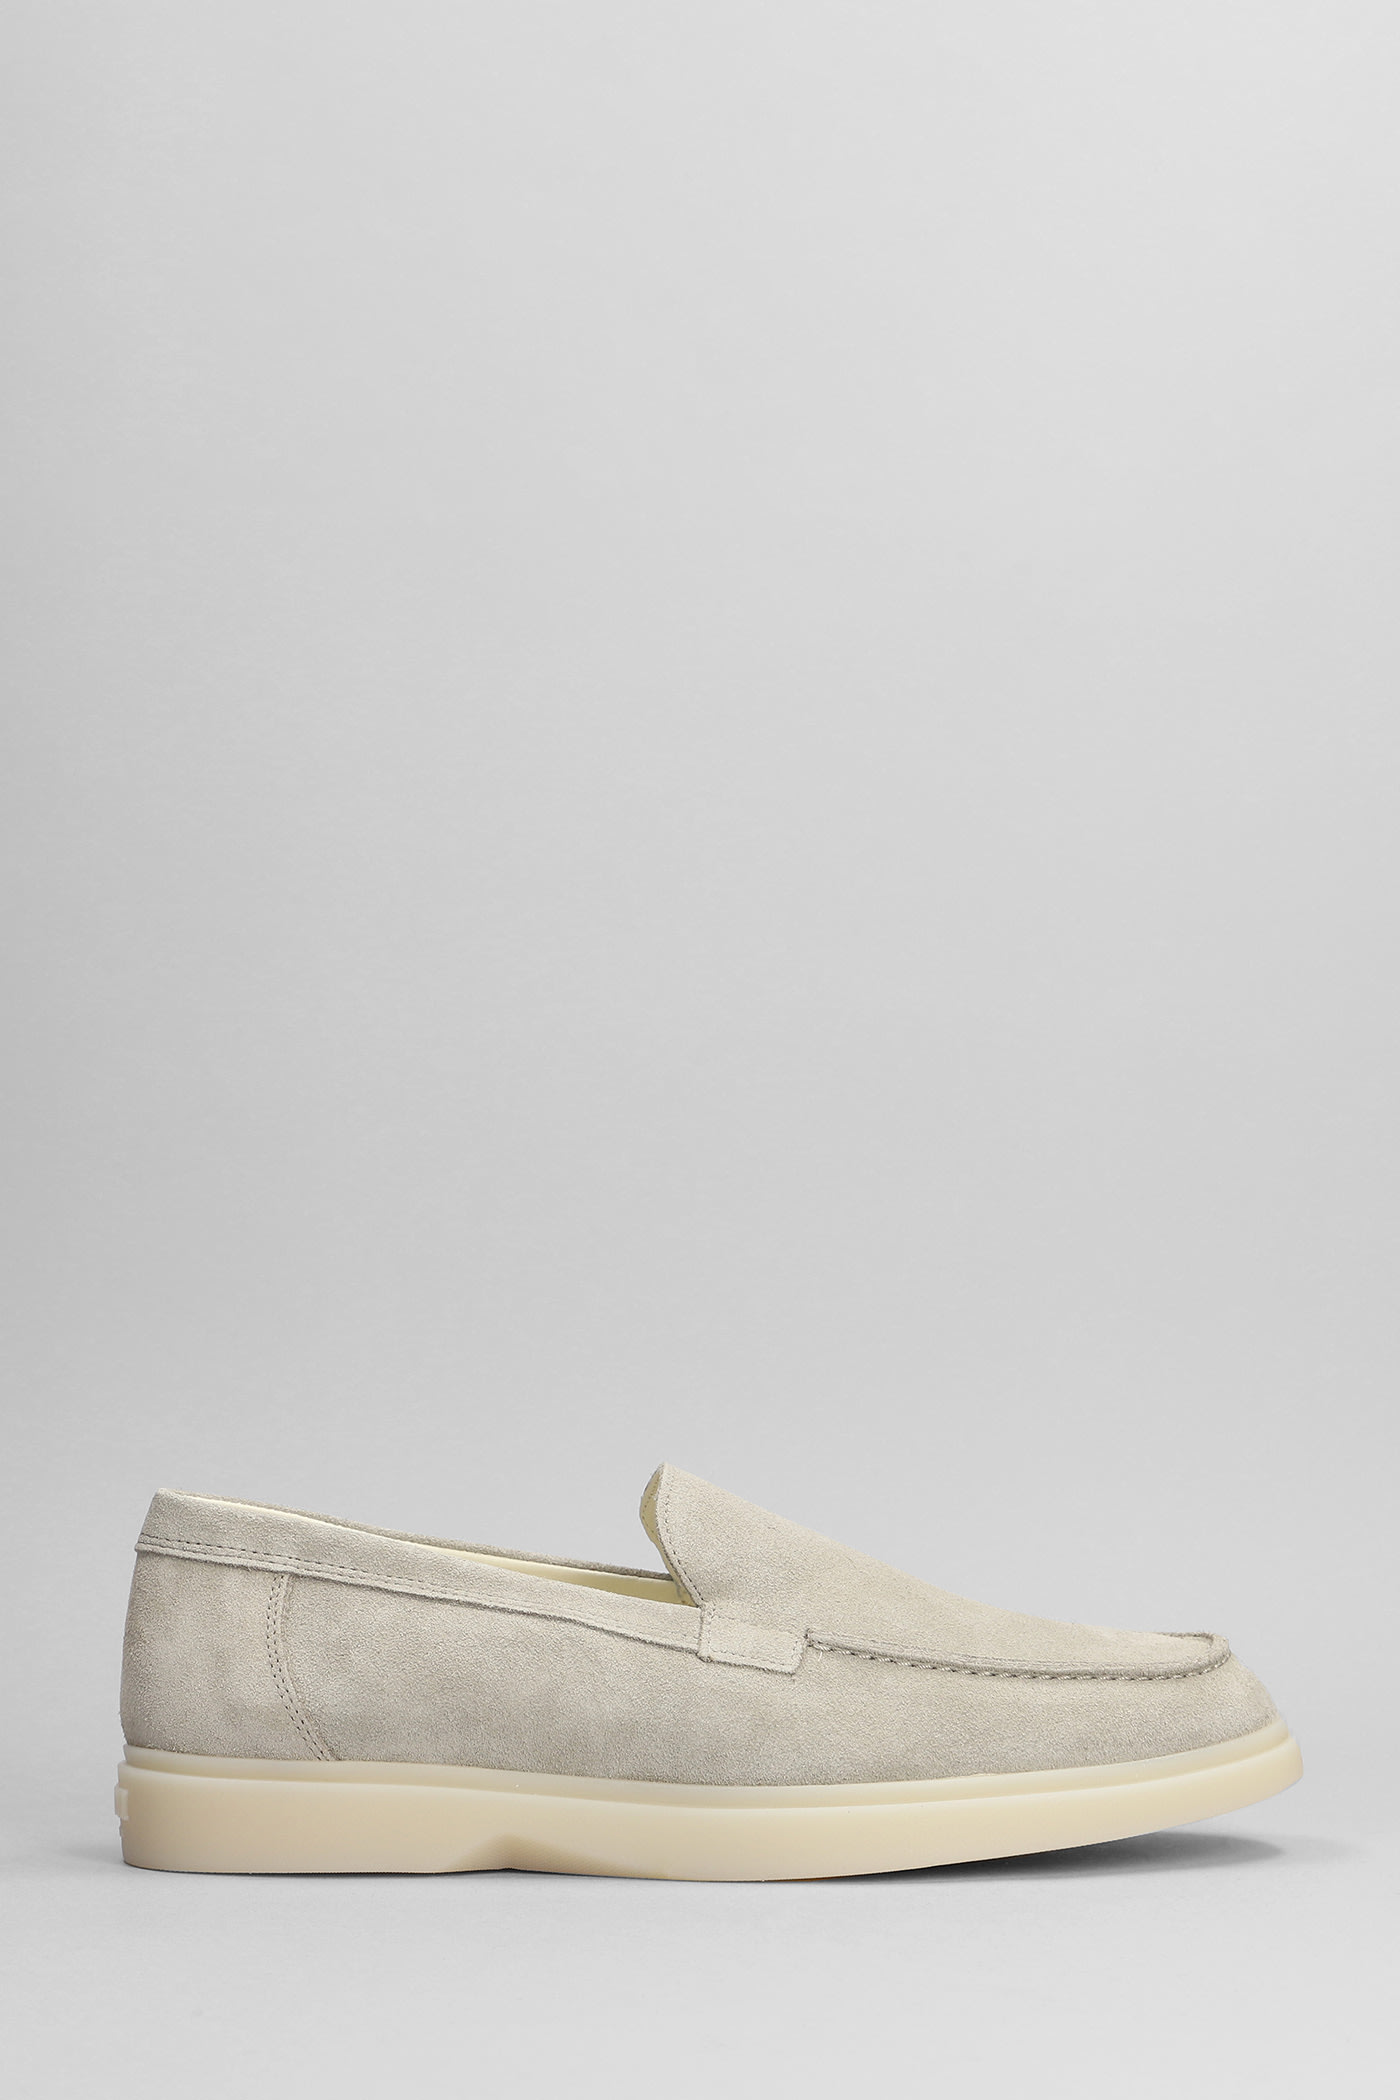 Mason Garments Amalfi Loafers In Taupe Suede